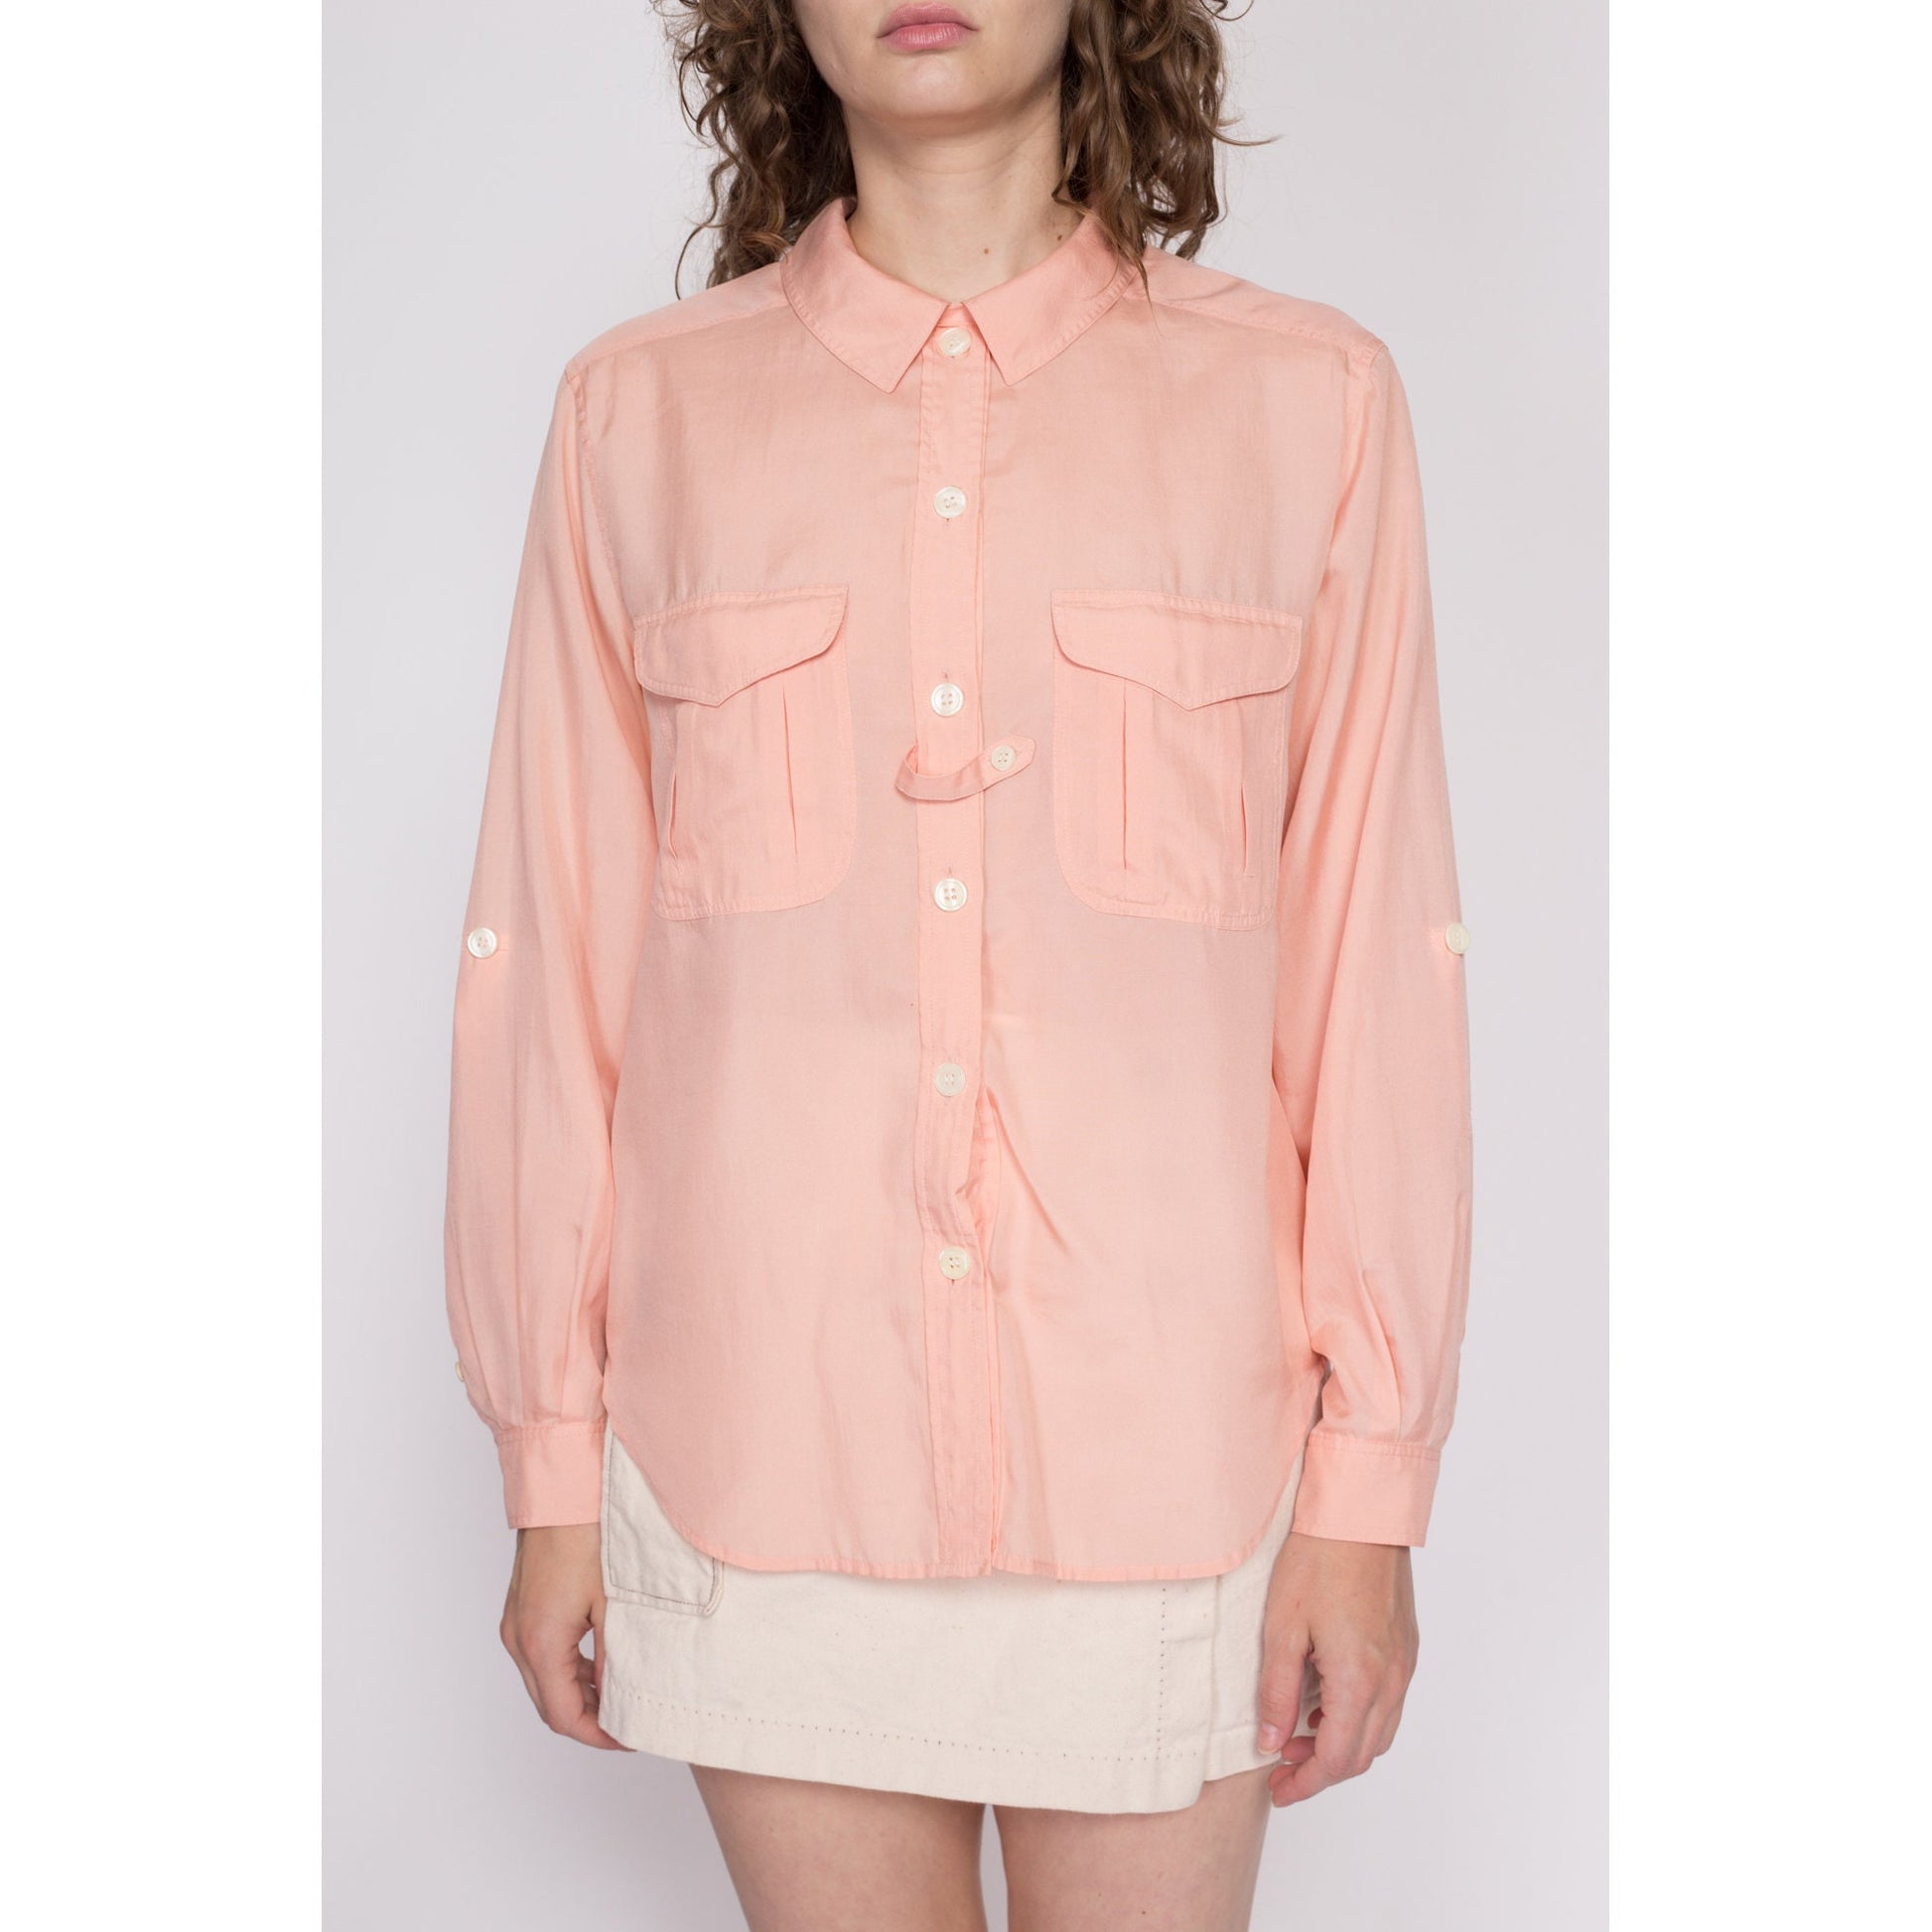 L| 80s Peach Silk Blend Cuffed Sleeve Blouse - Large | Vintage Minimalist Oversize Long Sleeve Button Up Collared Shirt